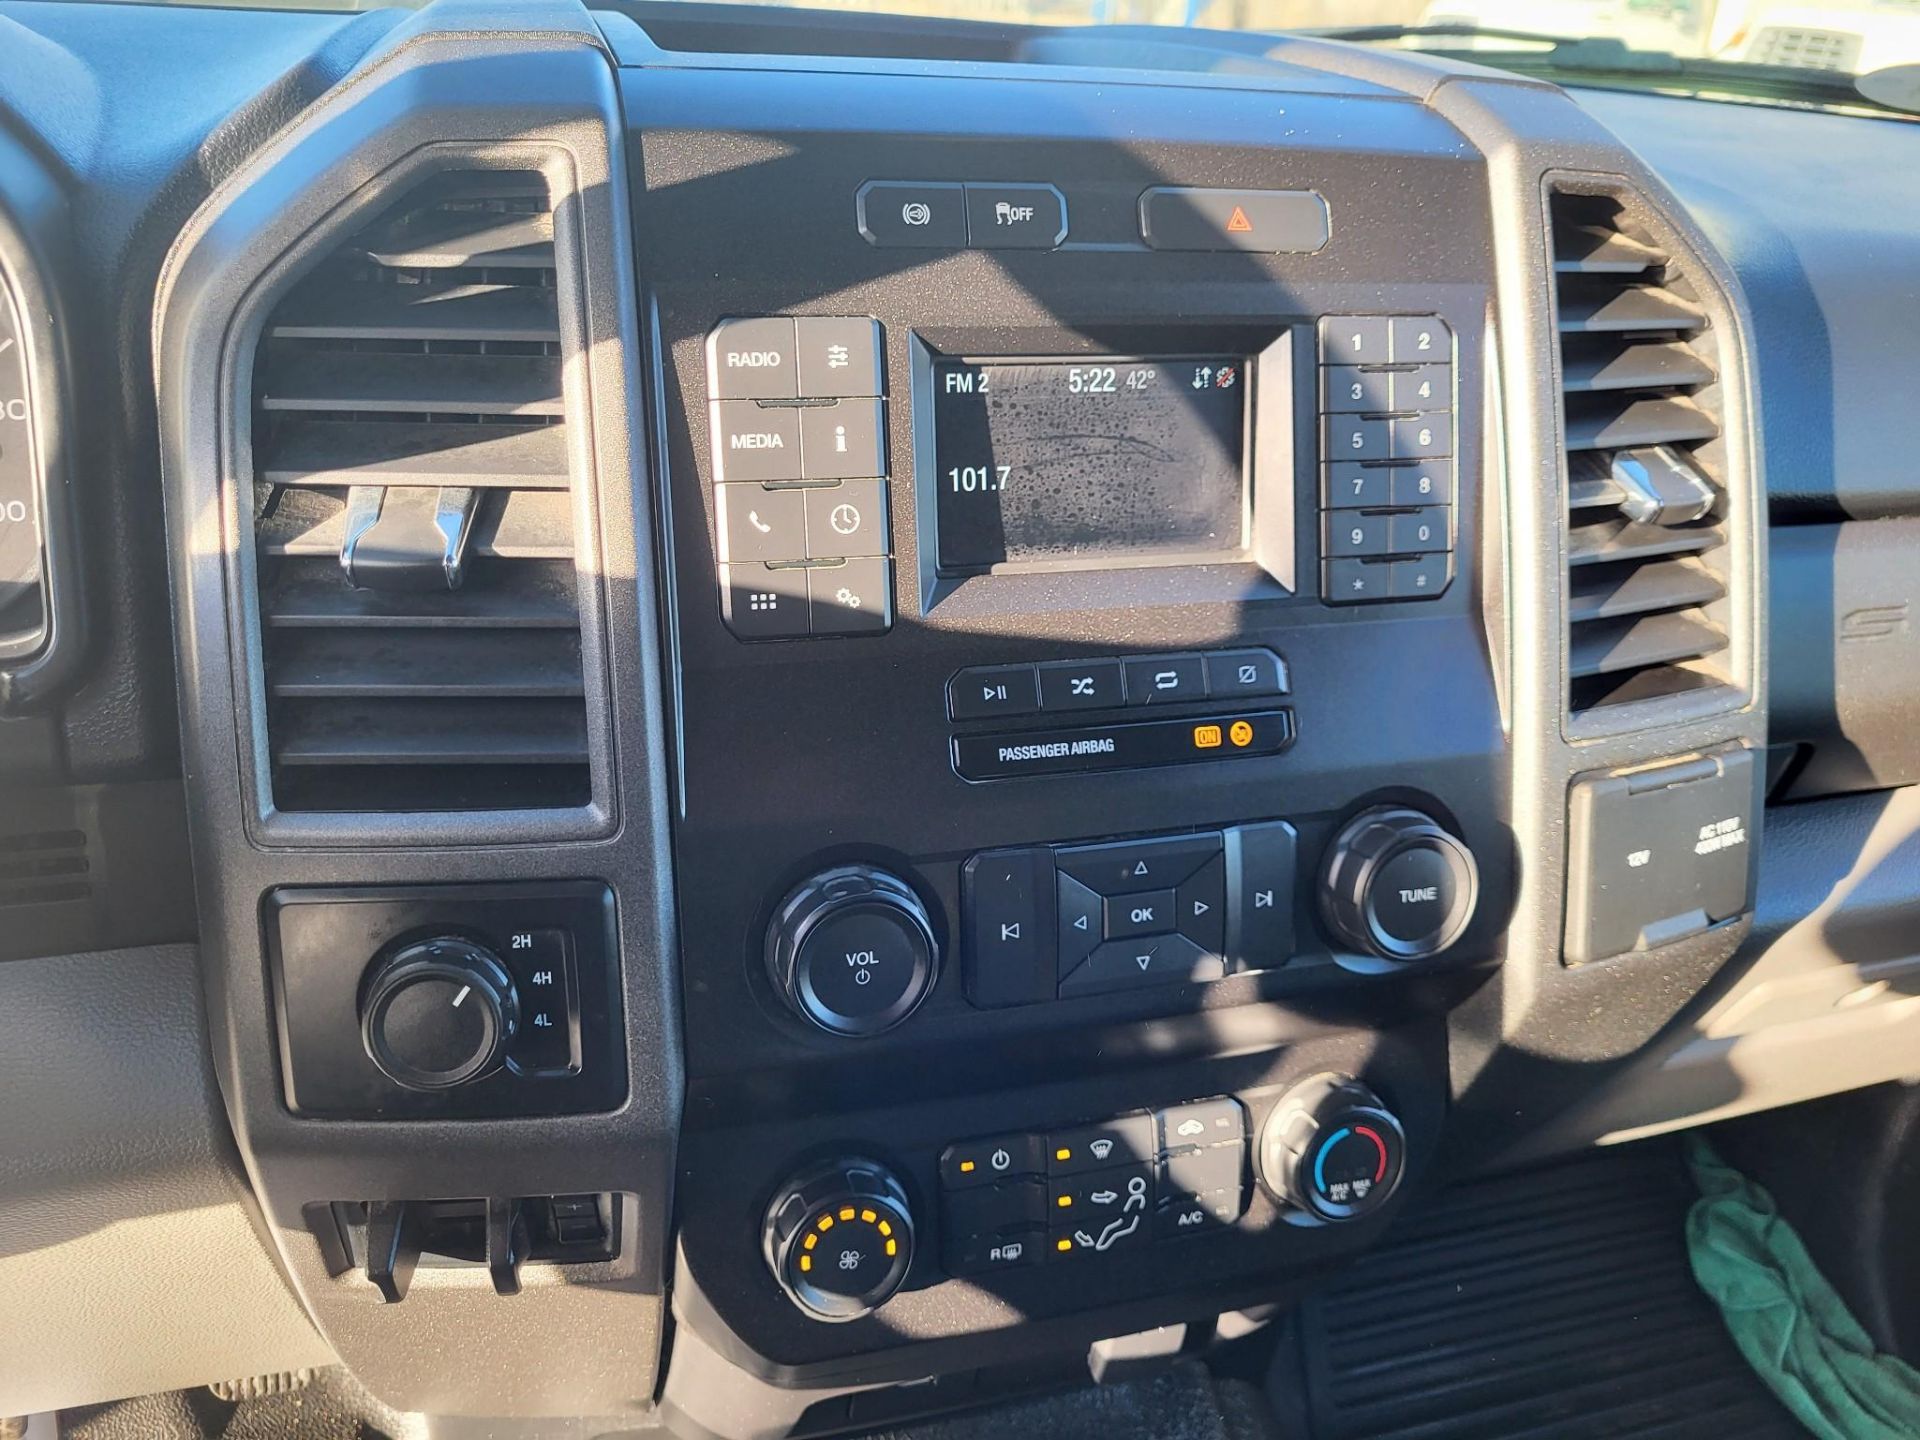 2021 FORD F350 CREW CAB DUALLY DIESEL FLATBED DUMP TRUCK 19,500 MILES! - Image 15 of 37